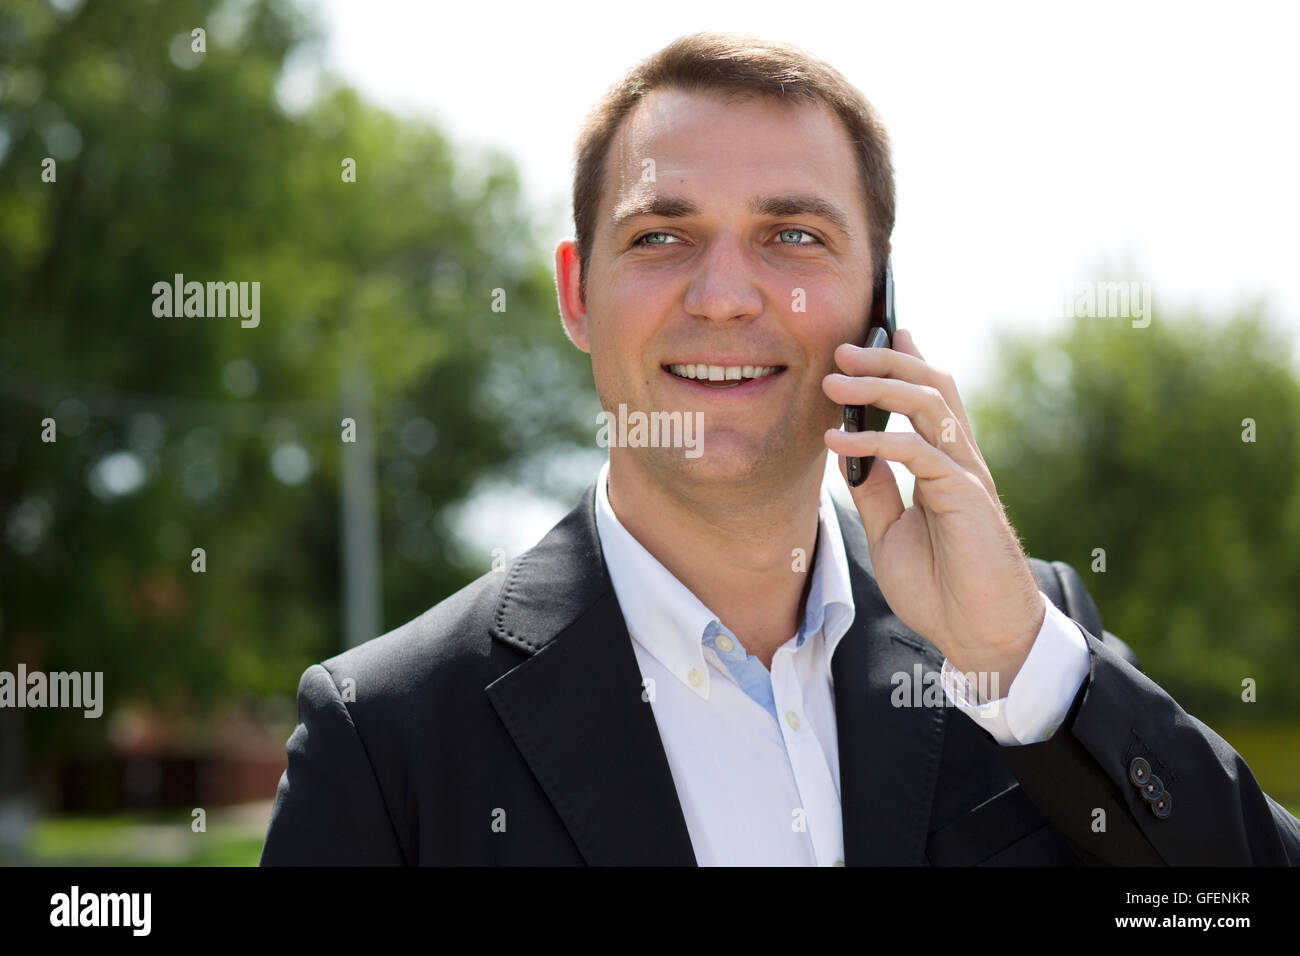 Young urban professional man talking on smartphone. Close up portrait of male business man on smart phone outdoors in suit jacke Stock Photo